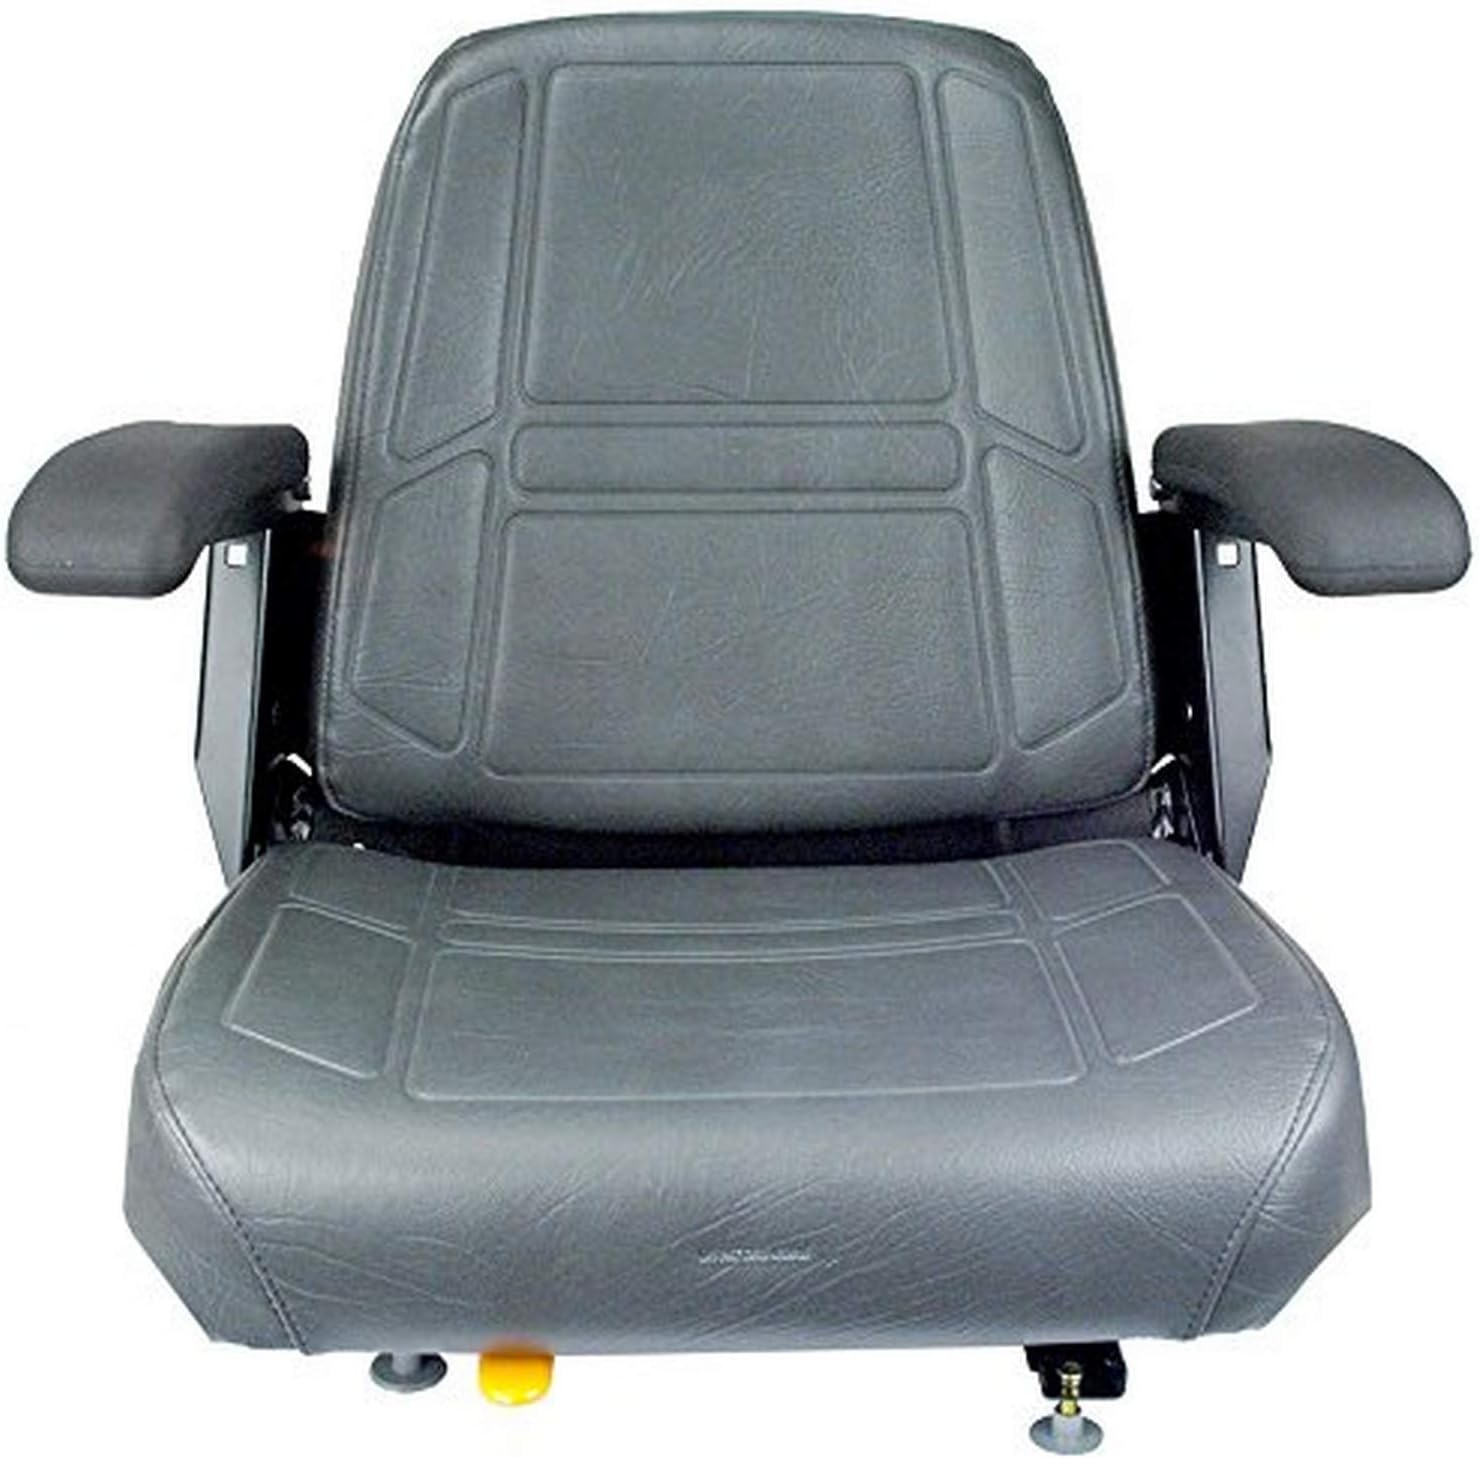 14845 Comfort Ride Mower Seat with Armrests